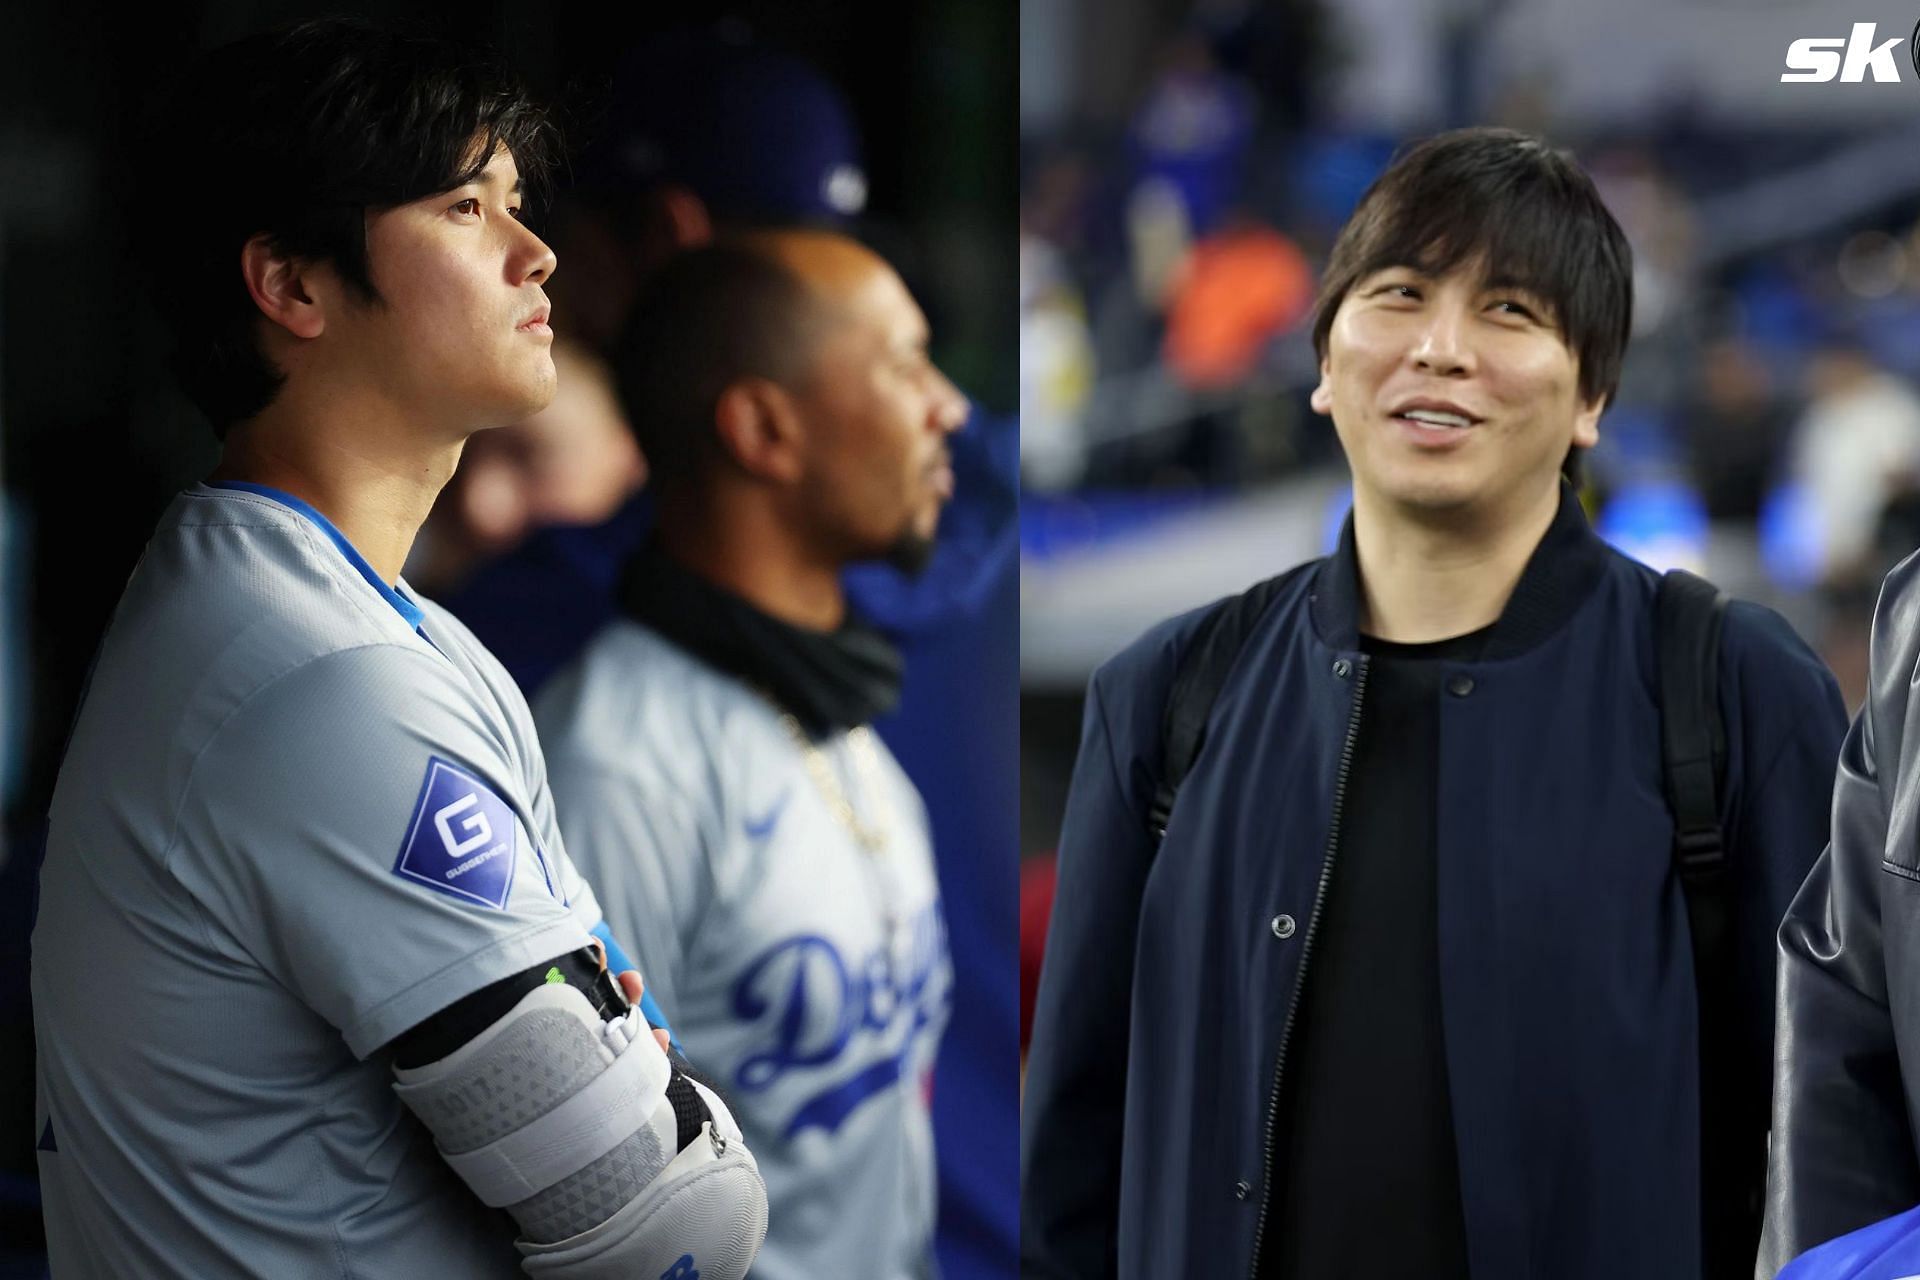 MLB fans take sarcastic jibe at Shohei Ohtani as reports dismiss Dodgers star